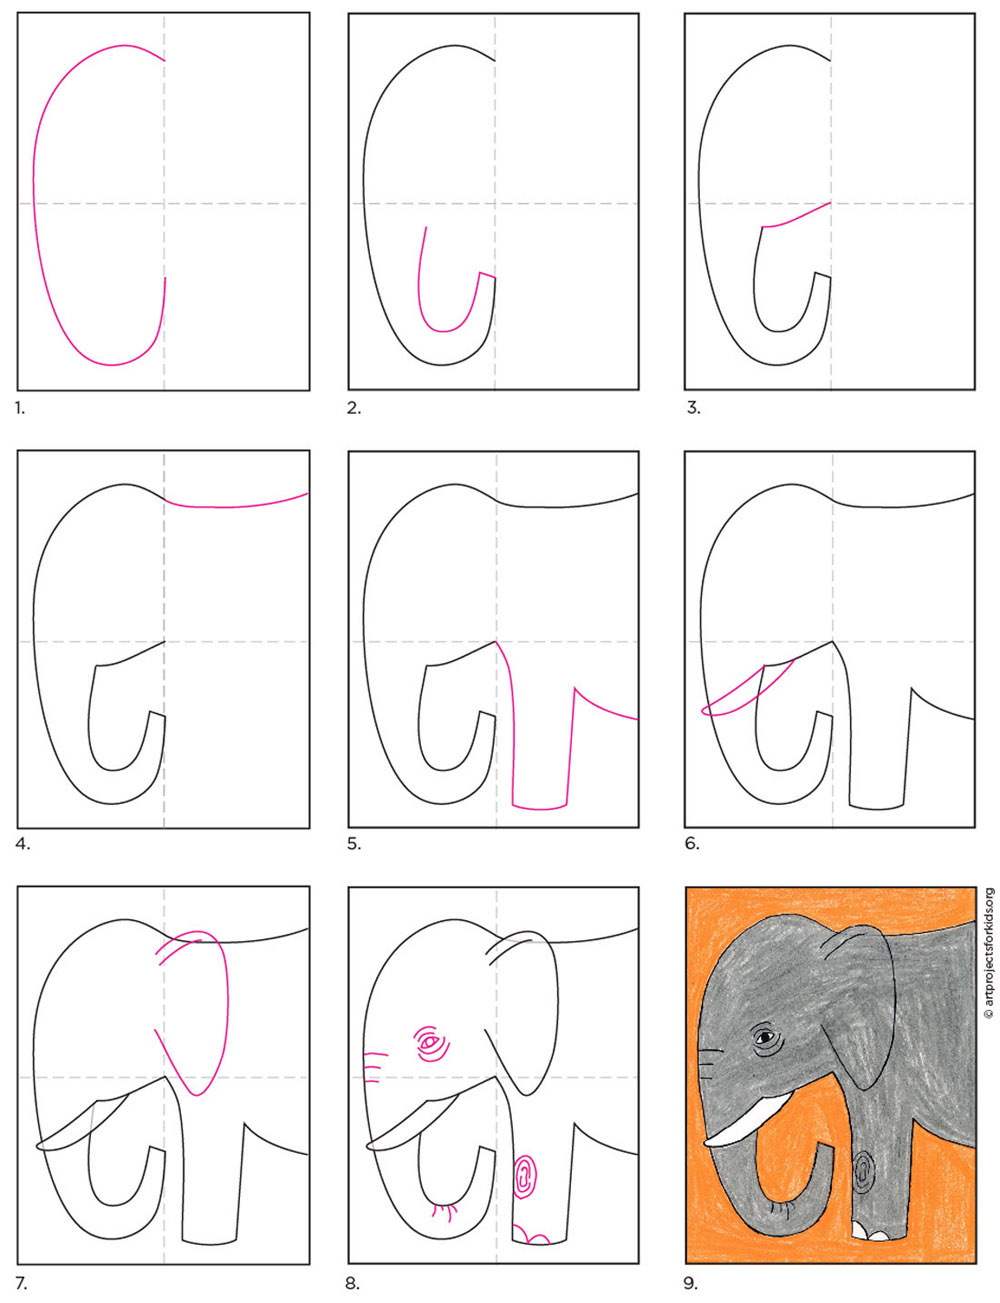 Easy How to Draw an Elephant Tutorial and Elephant